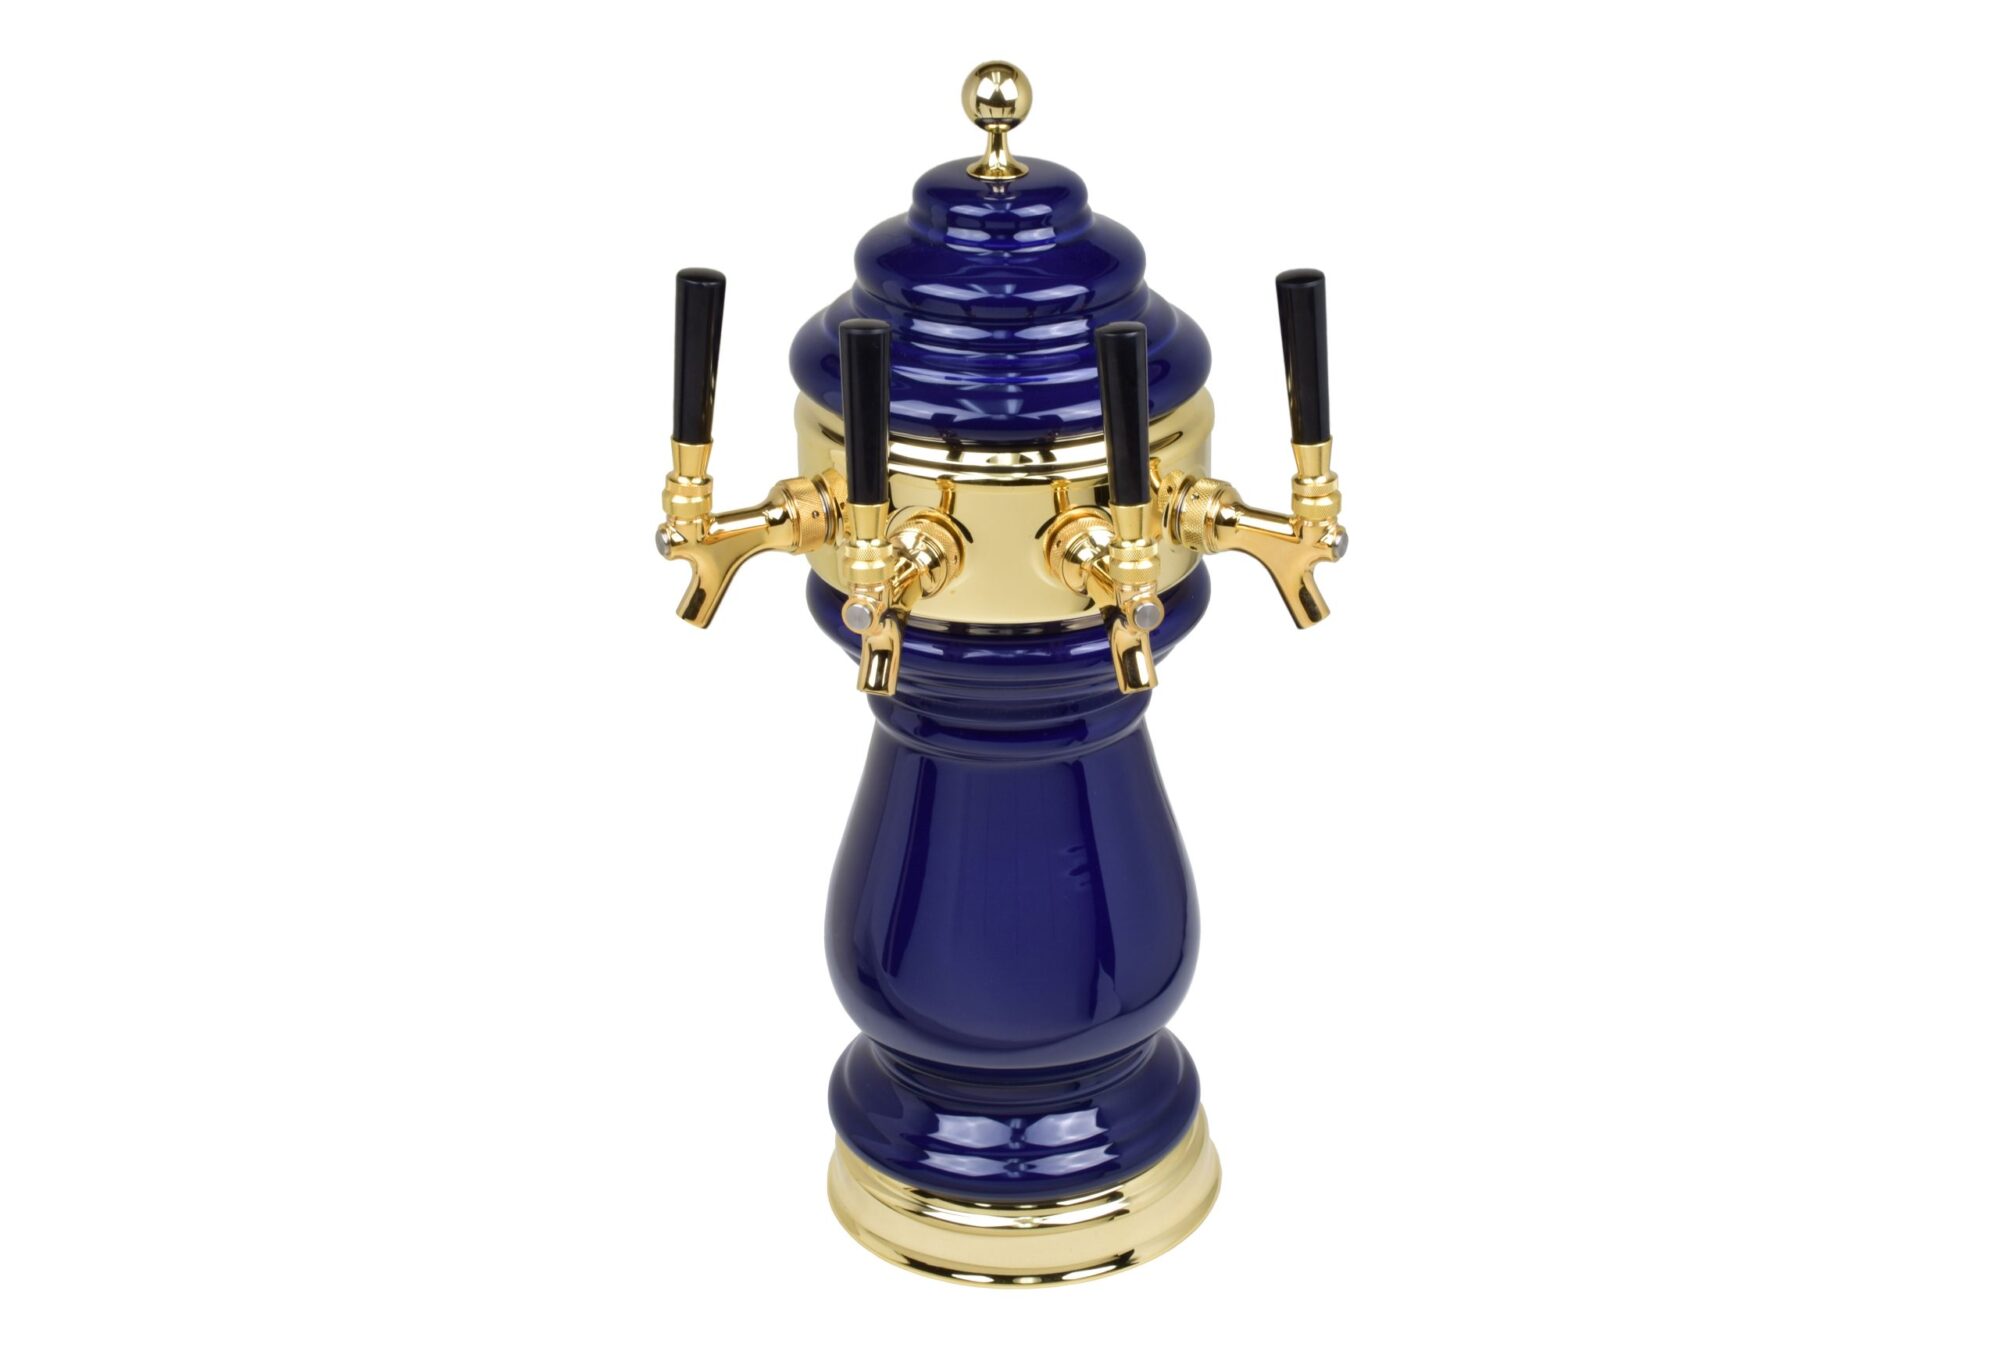 882B-4BL Four Faucet Ceramic Tower with PVD Brass Hardware - Available in 5 Colors - Shown in Cobalt Blue